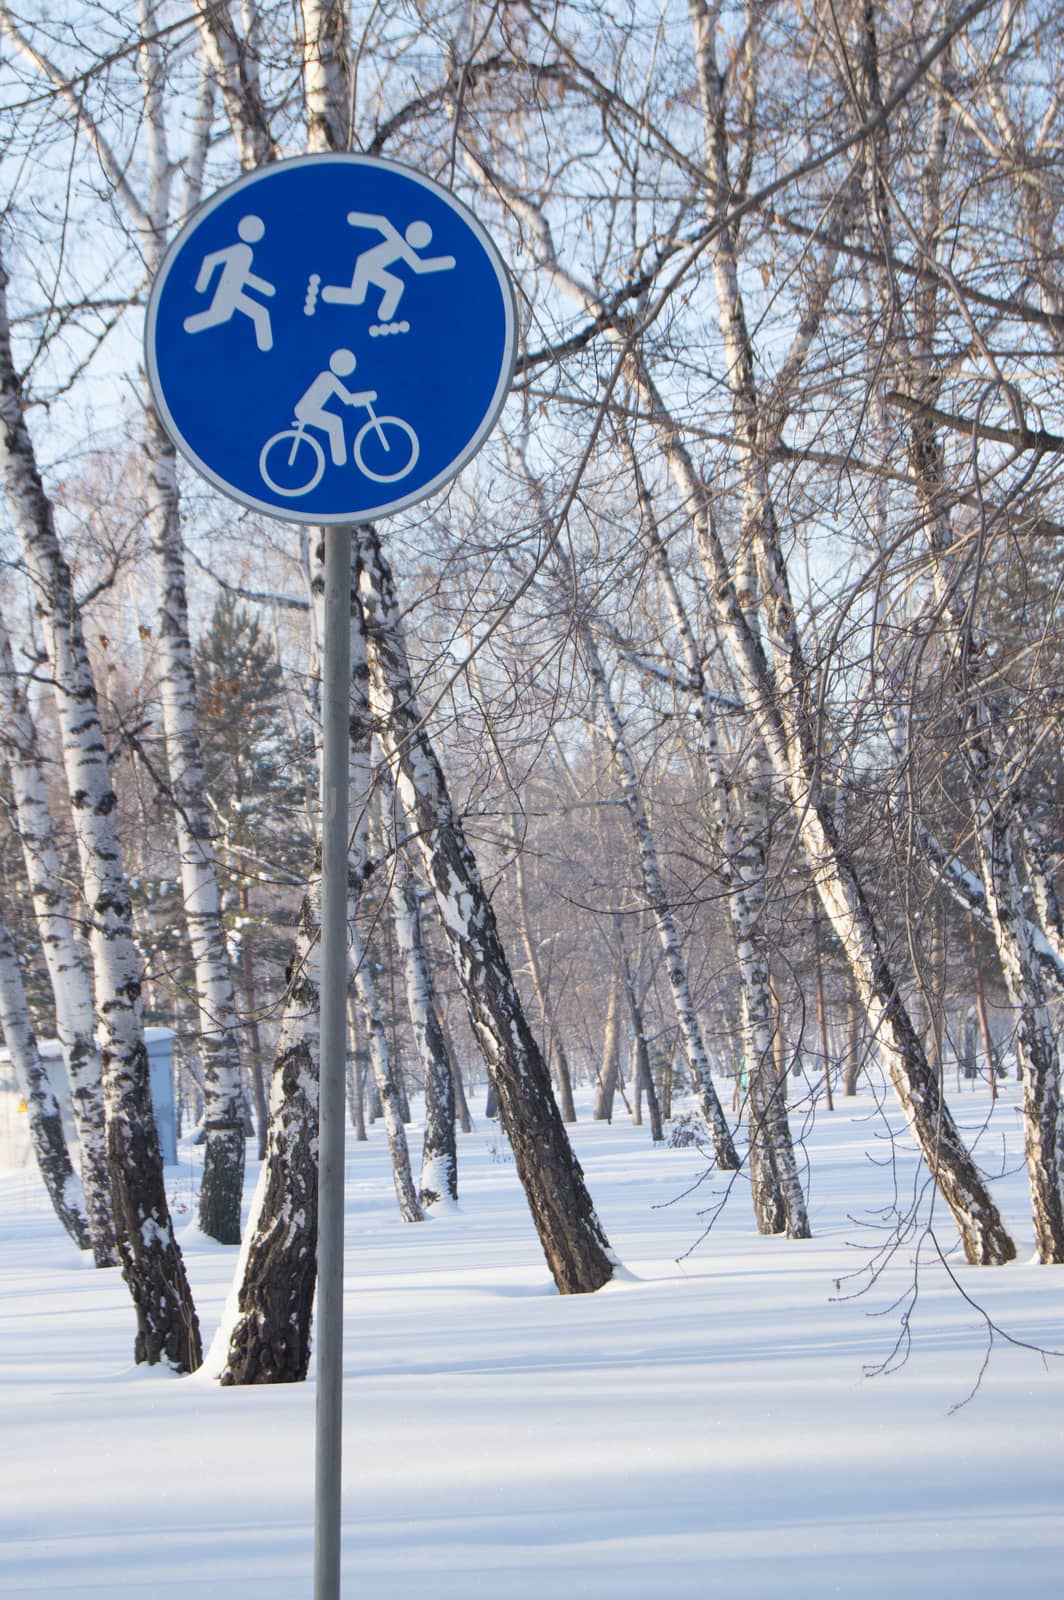 Concept sports activities in the winter. Sign of the Bicycle, skating and Jogging.